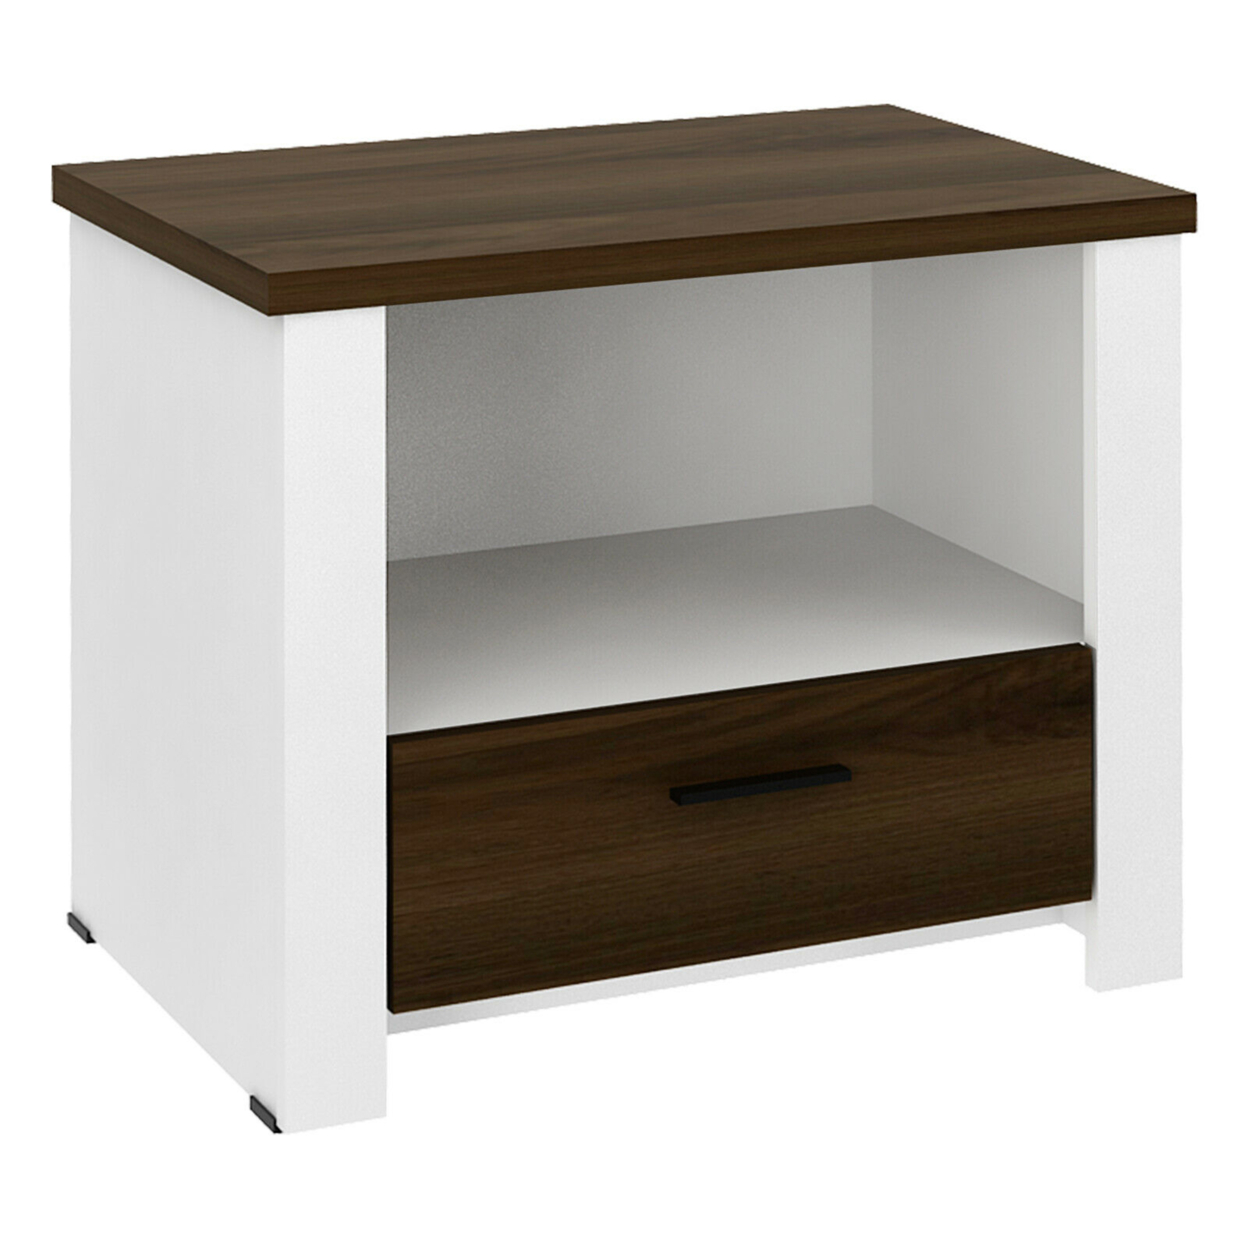 Accent Nightstand With Drawer And Open Shelf Sofa End Table Bedroom Living Room